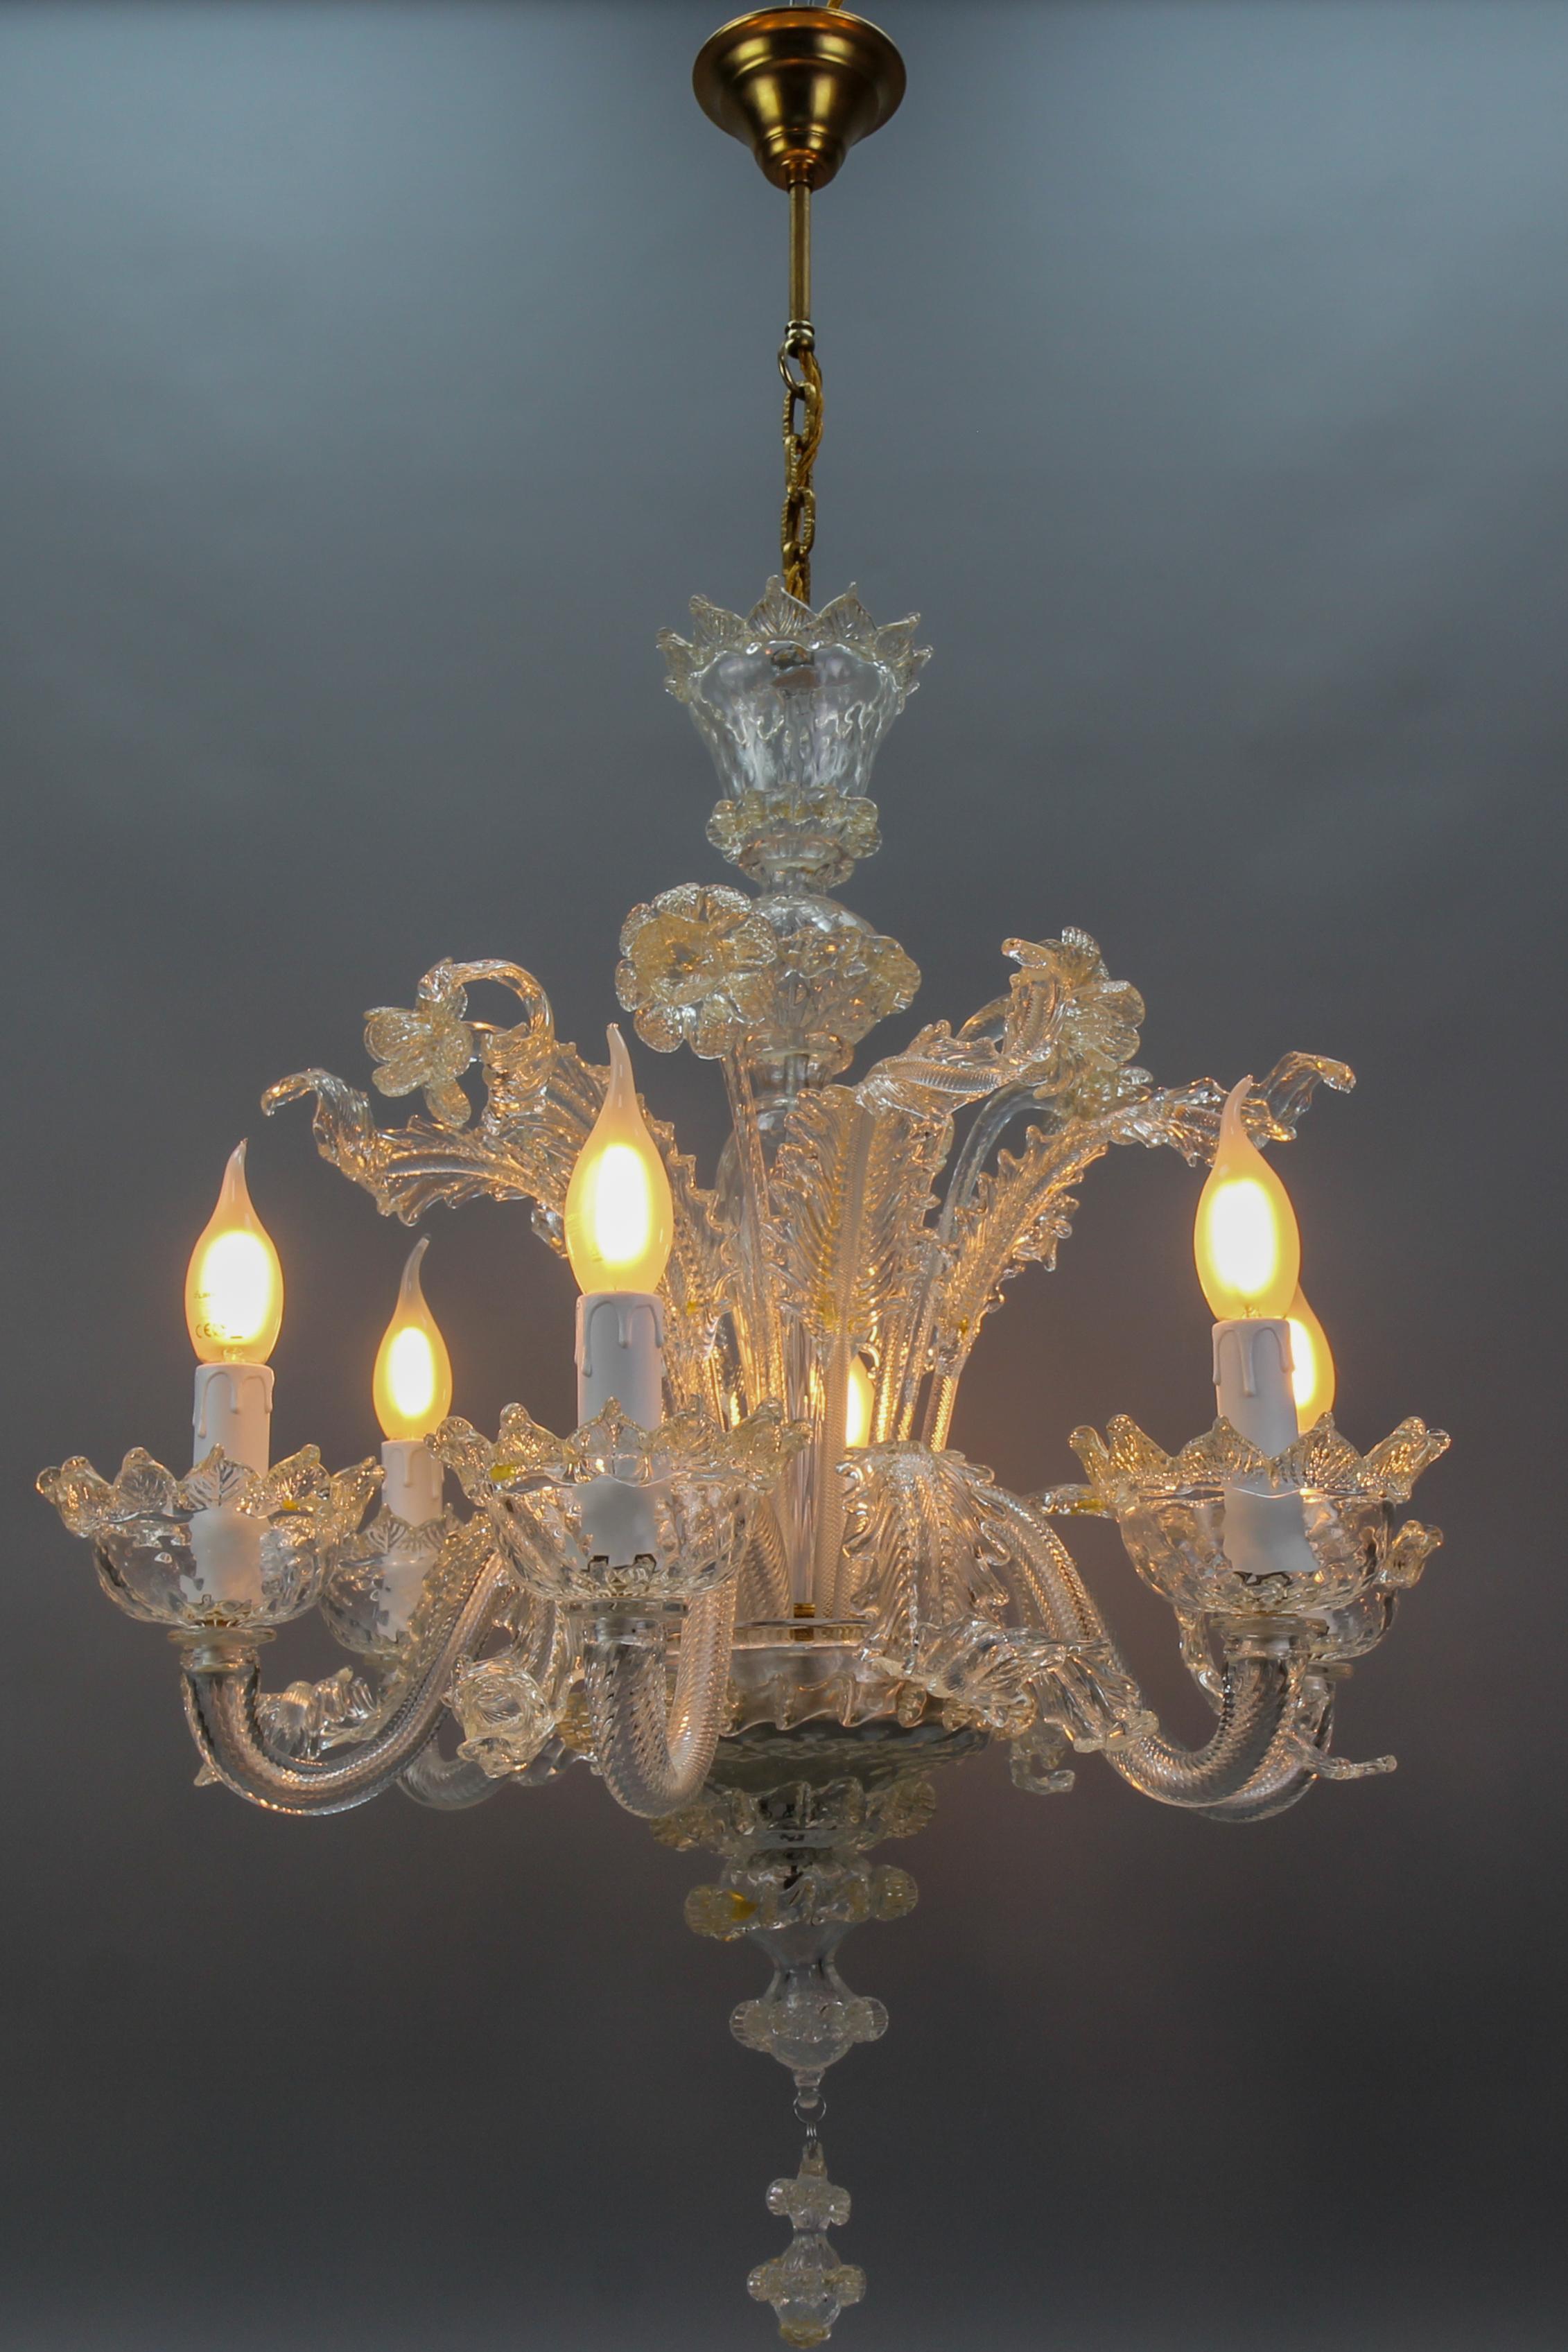 Italian Venetian Murano clear glass and gold dust floral six-light chandelier from the circa 1950s.
This majestic Murano glass chandelier with gold inclusions inside the clear glass features six curved glass arms with candle-style lights and is